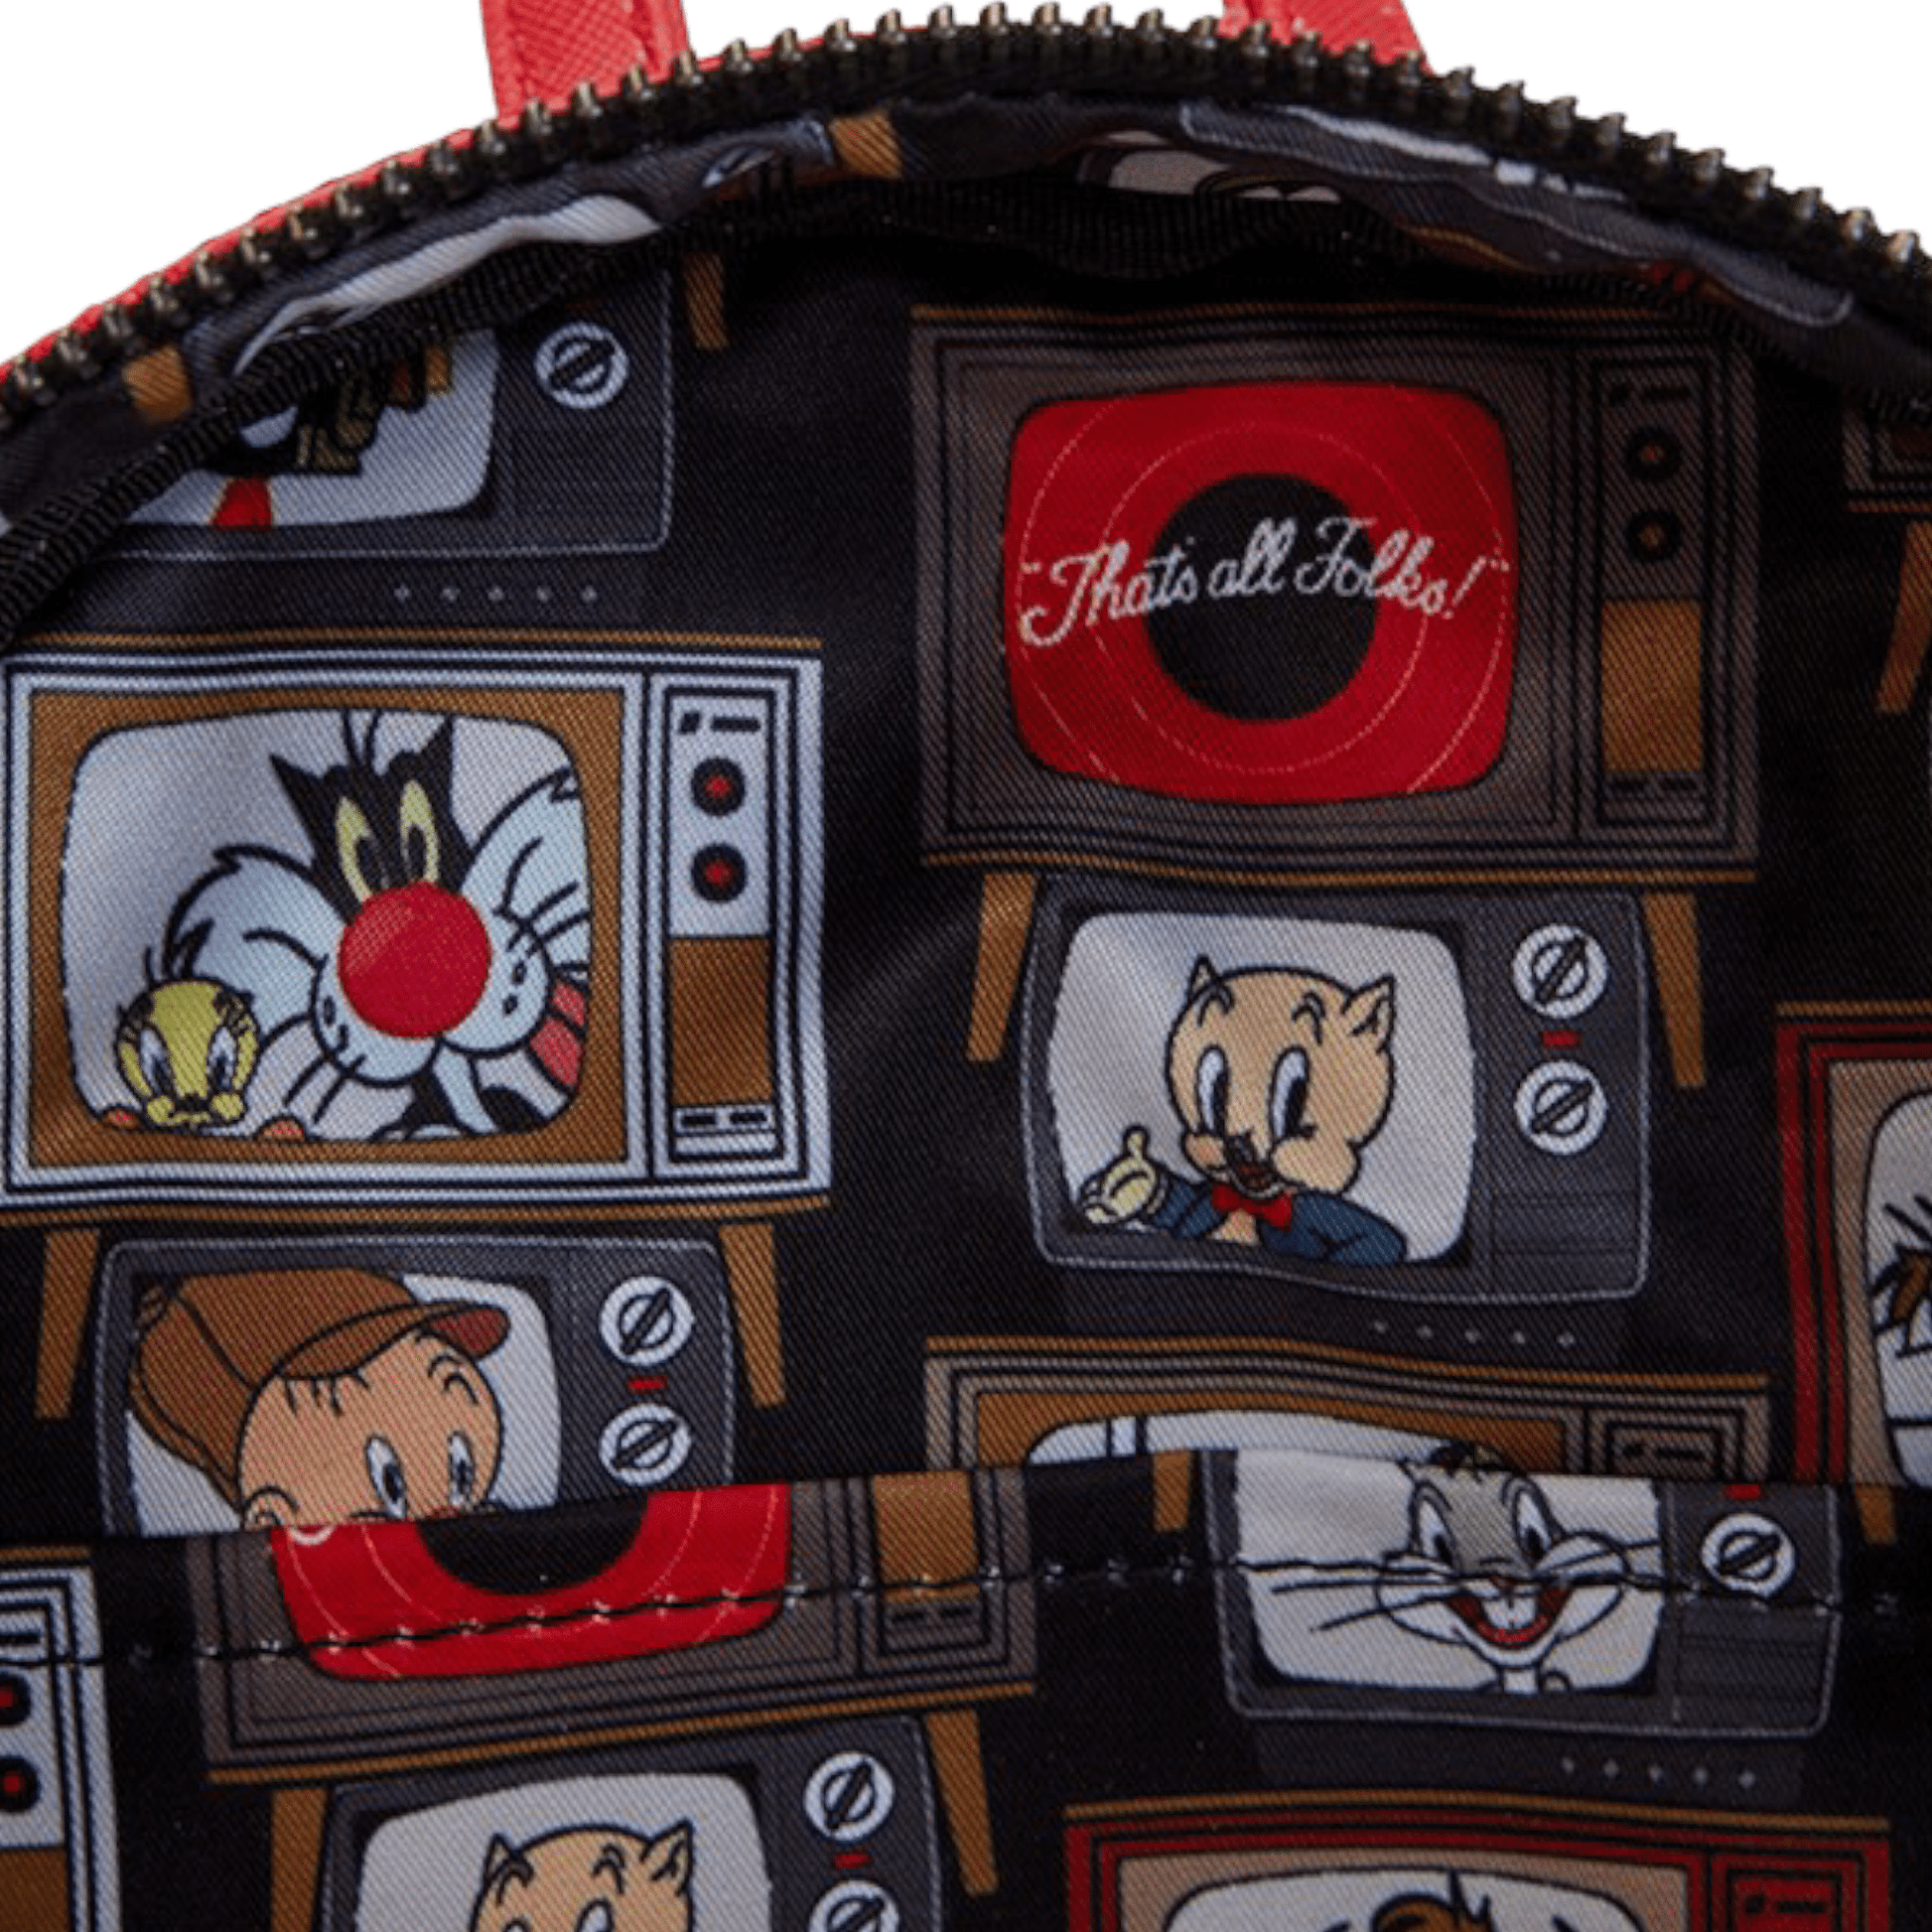 Sac à dos - Thats All Folks - Looney Tunes - Loungefly J'M T Créa